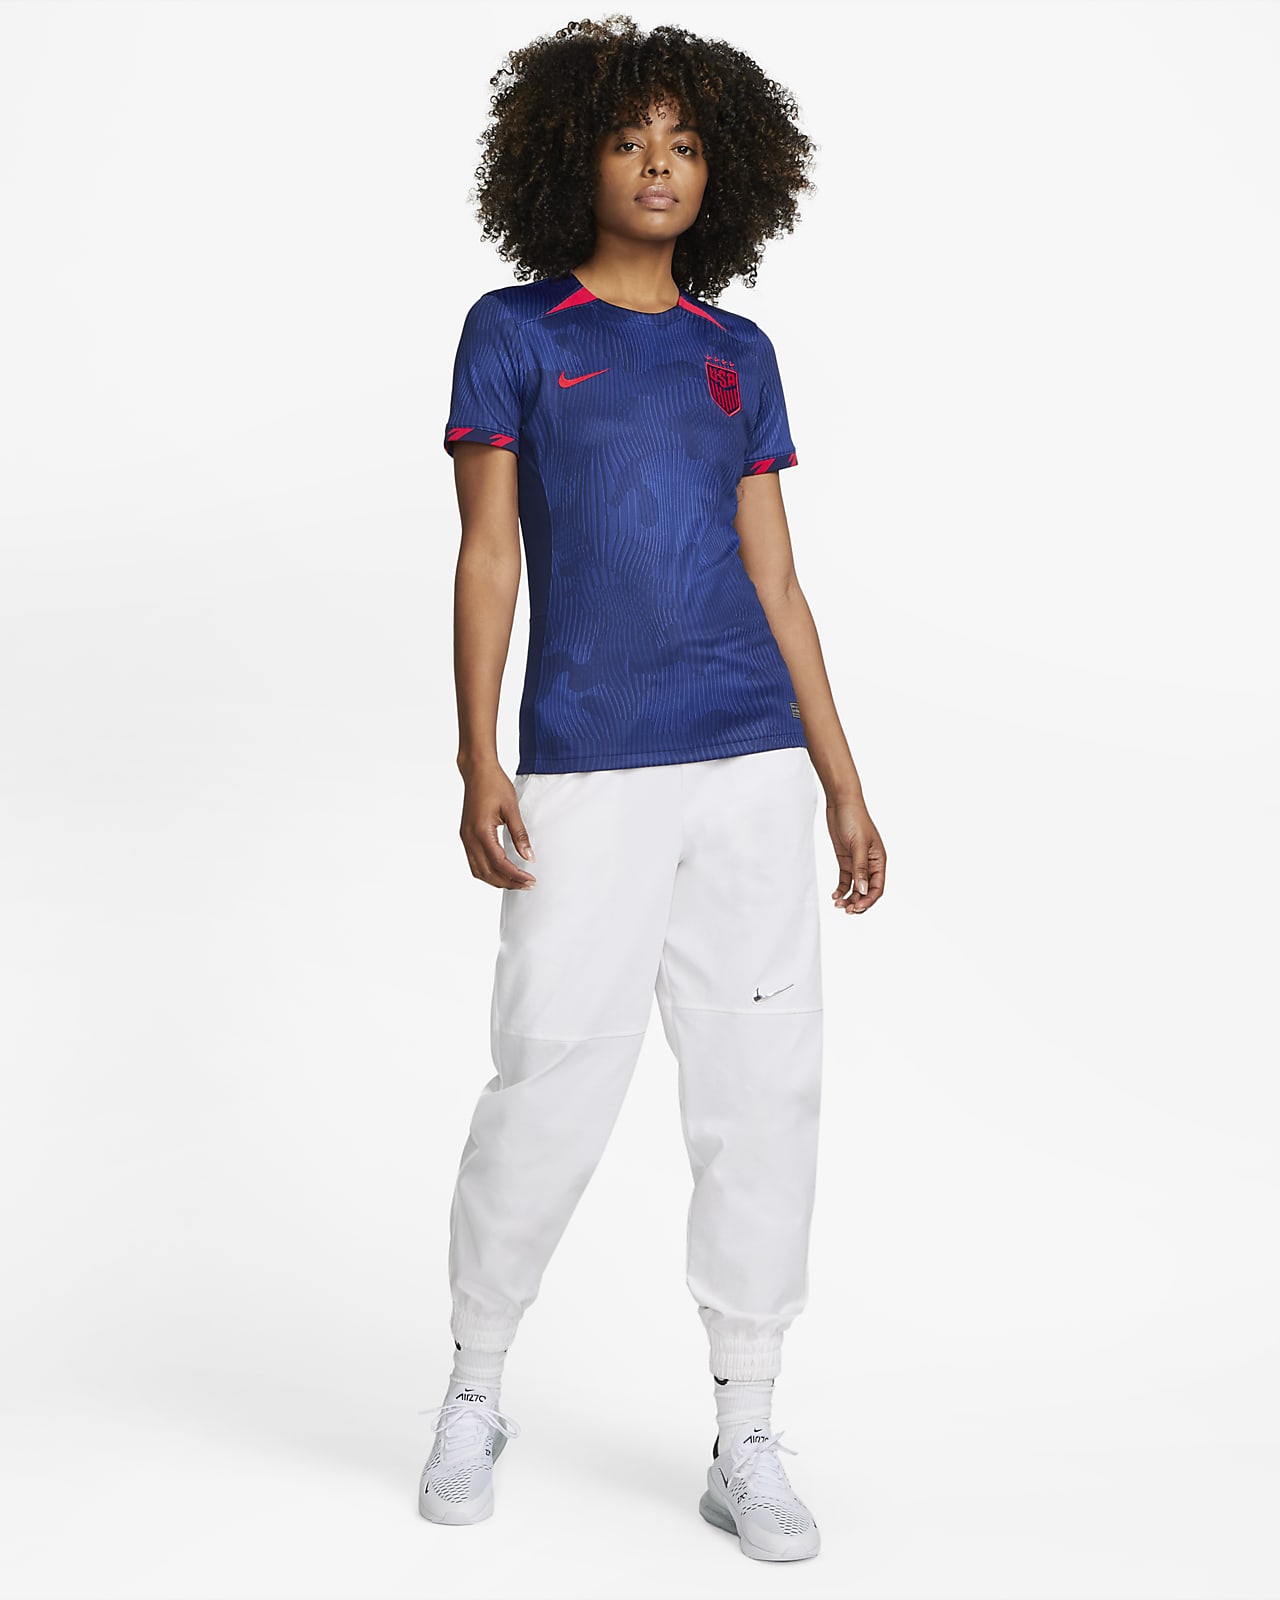 USWNT 2019 World Cup jersey